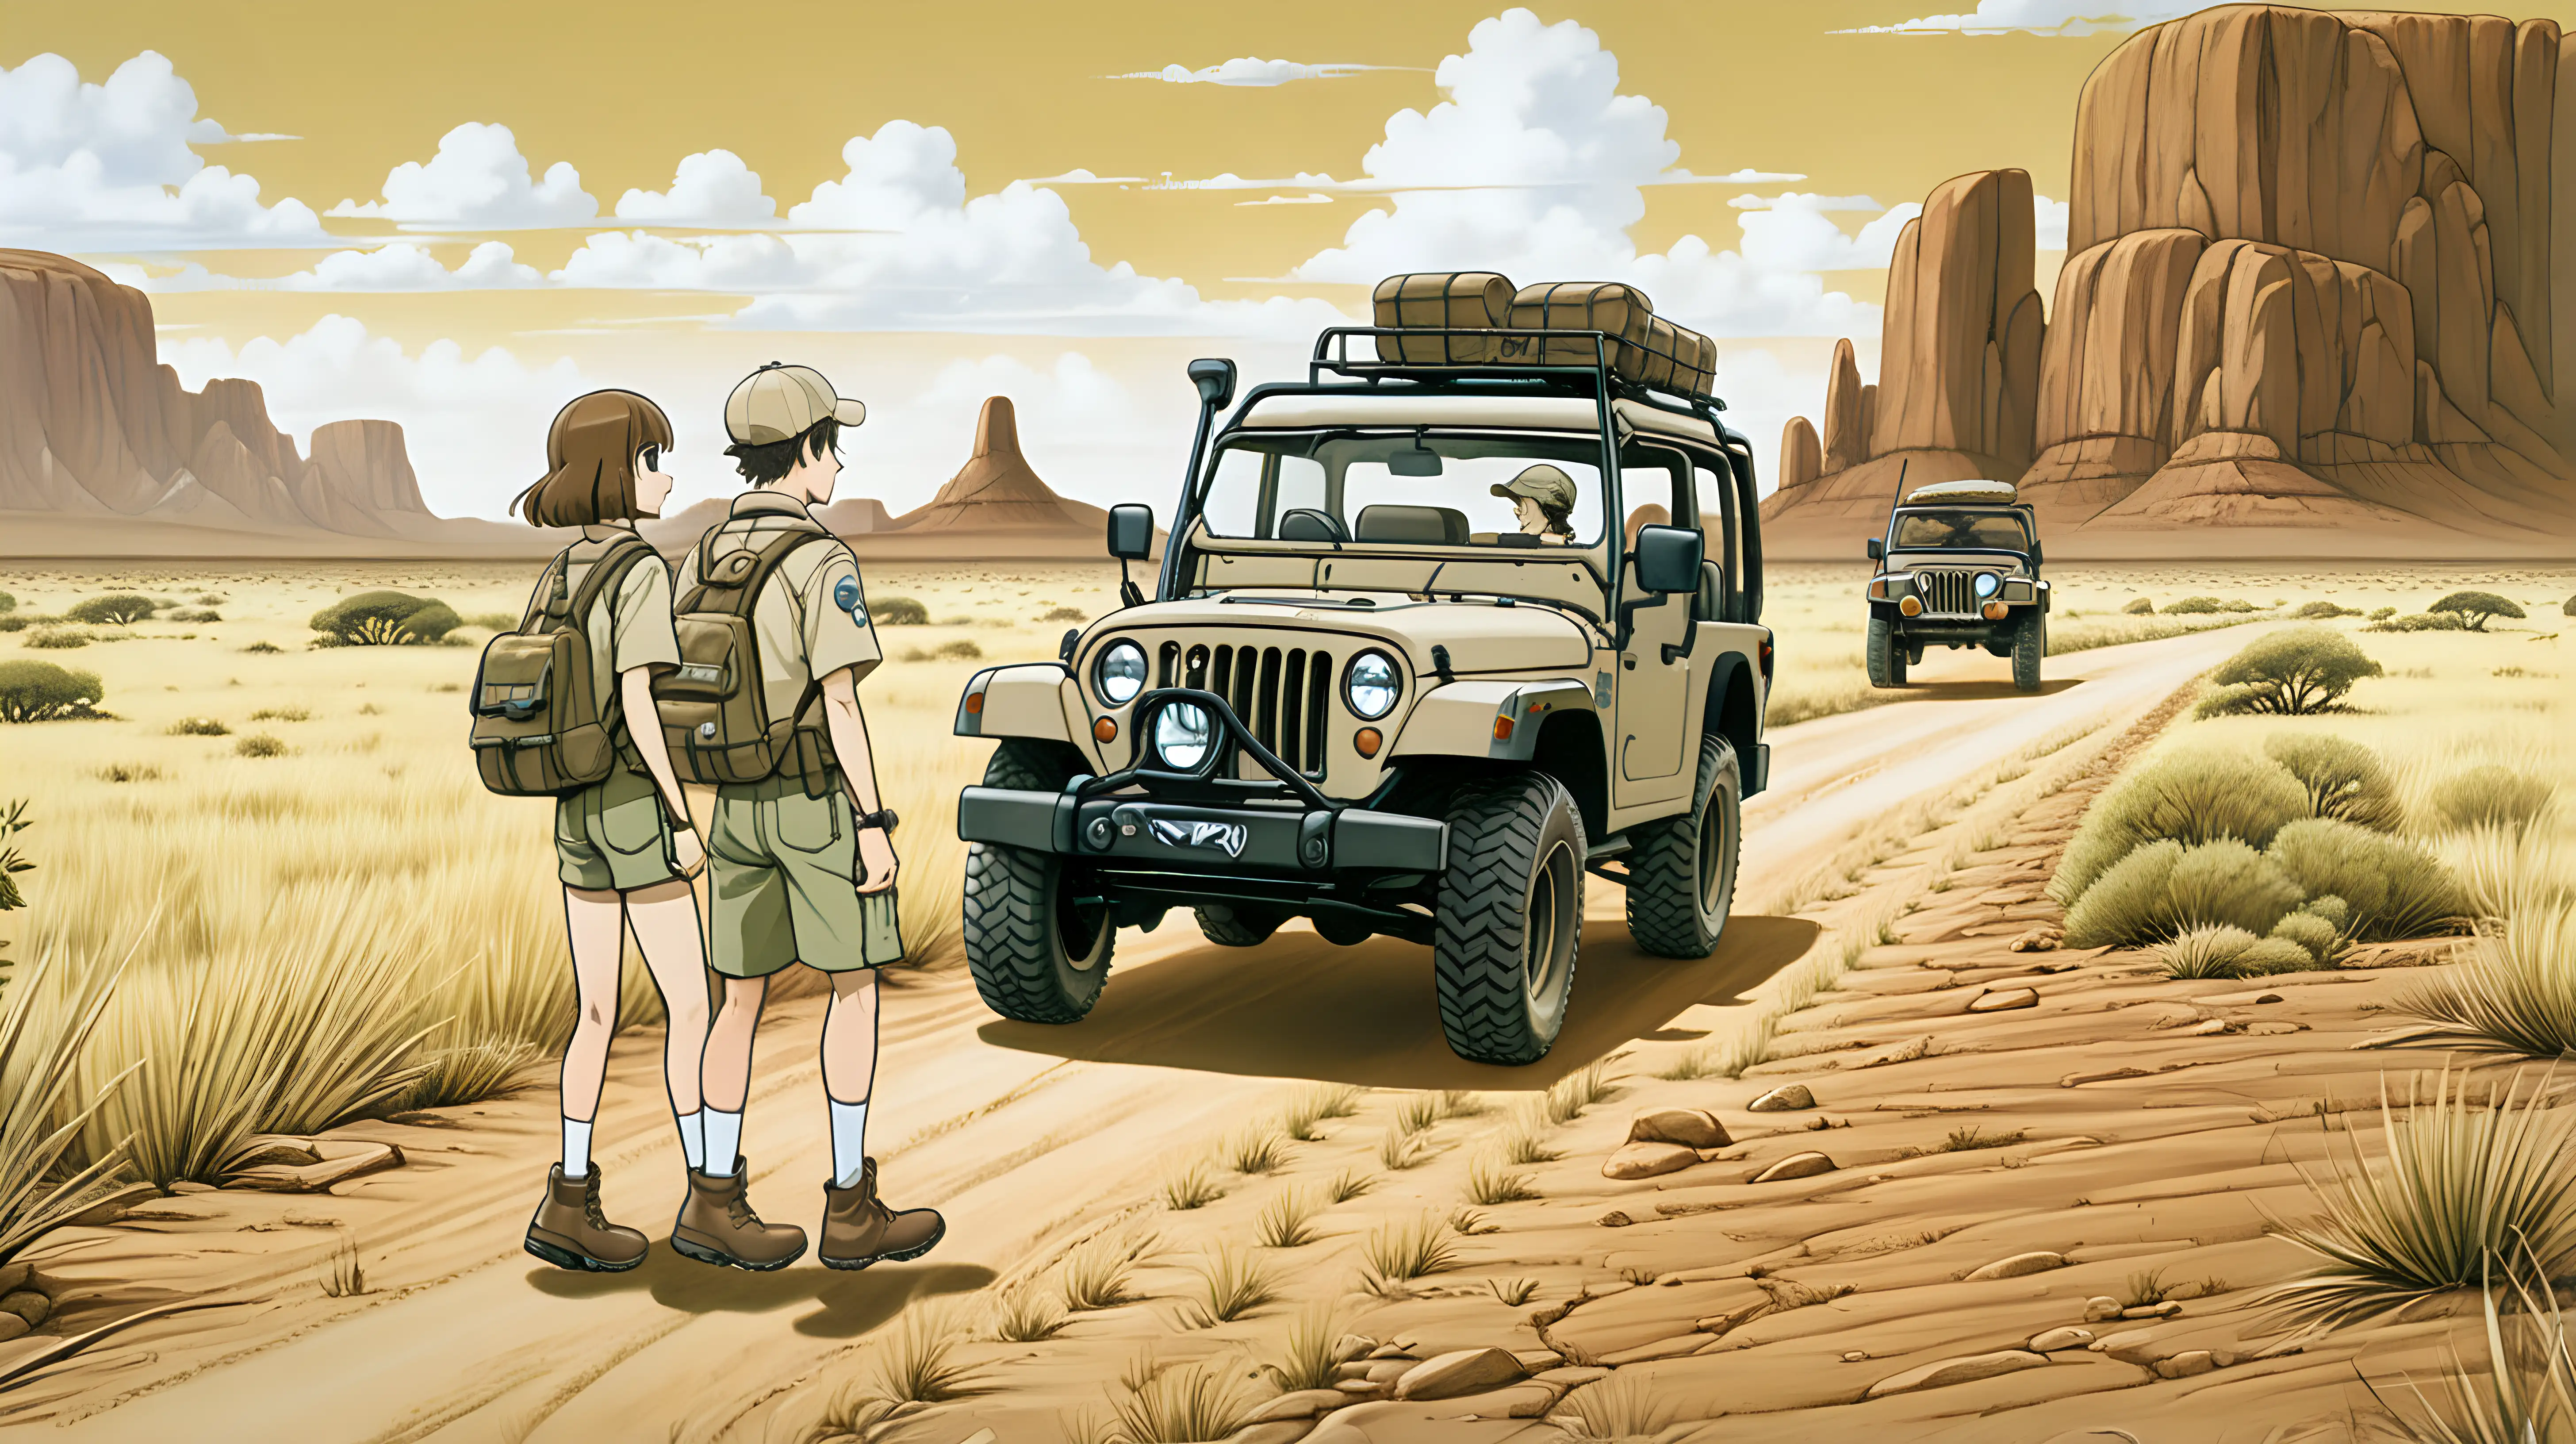 A landscape view of two Australian people wearing khaki shirts and shorts while walking in the outback with a jeep in the background, in an anime style